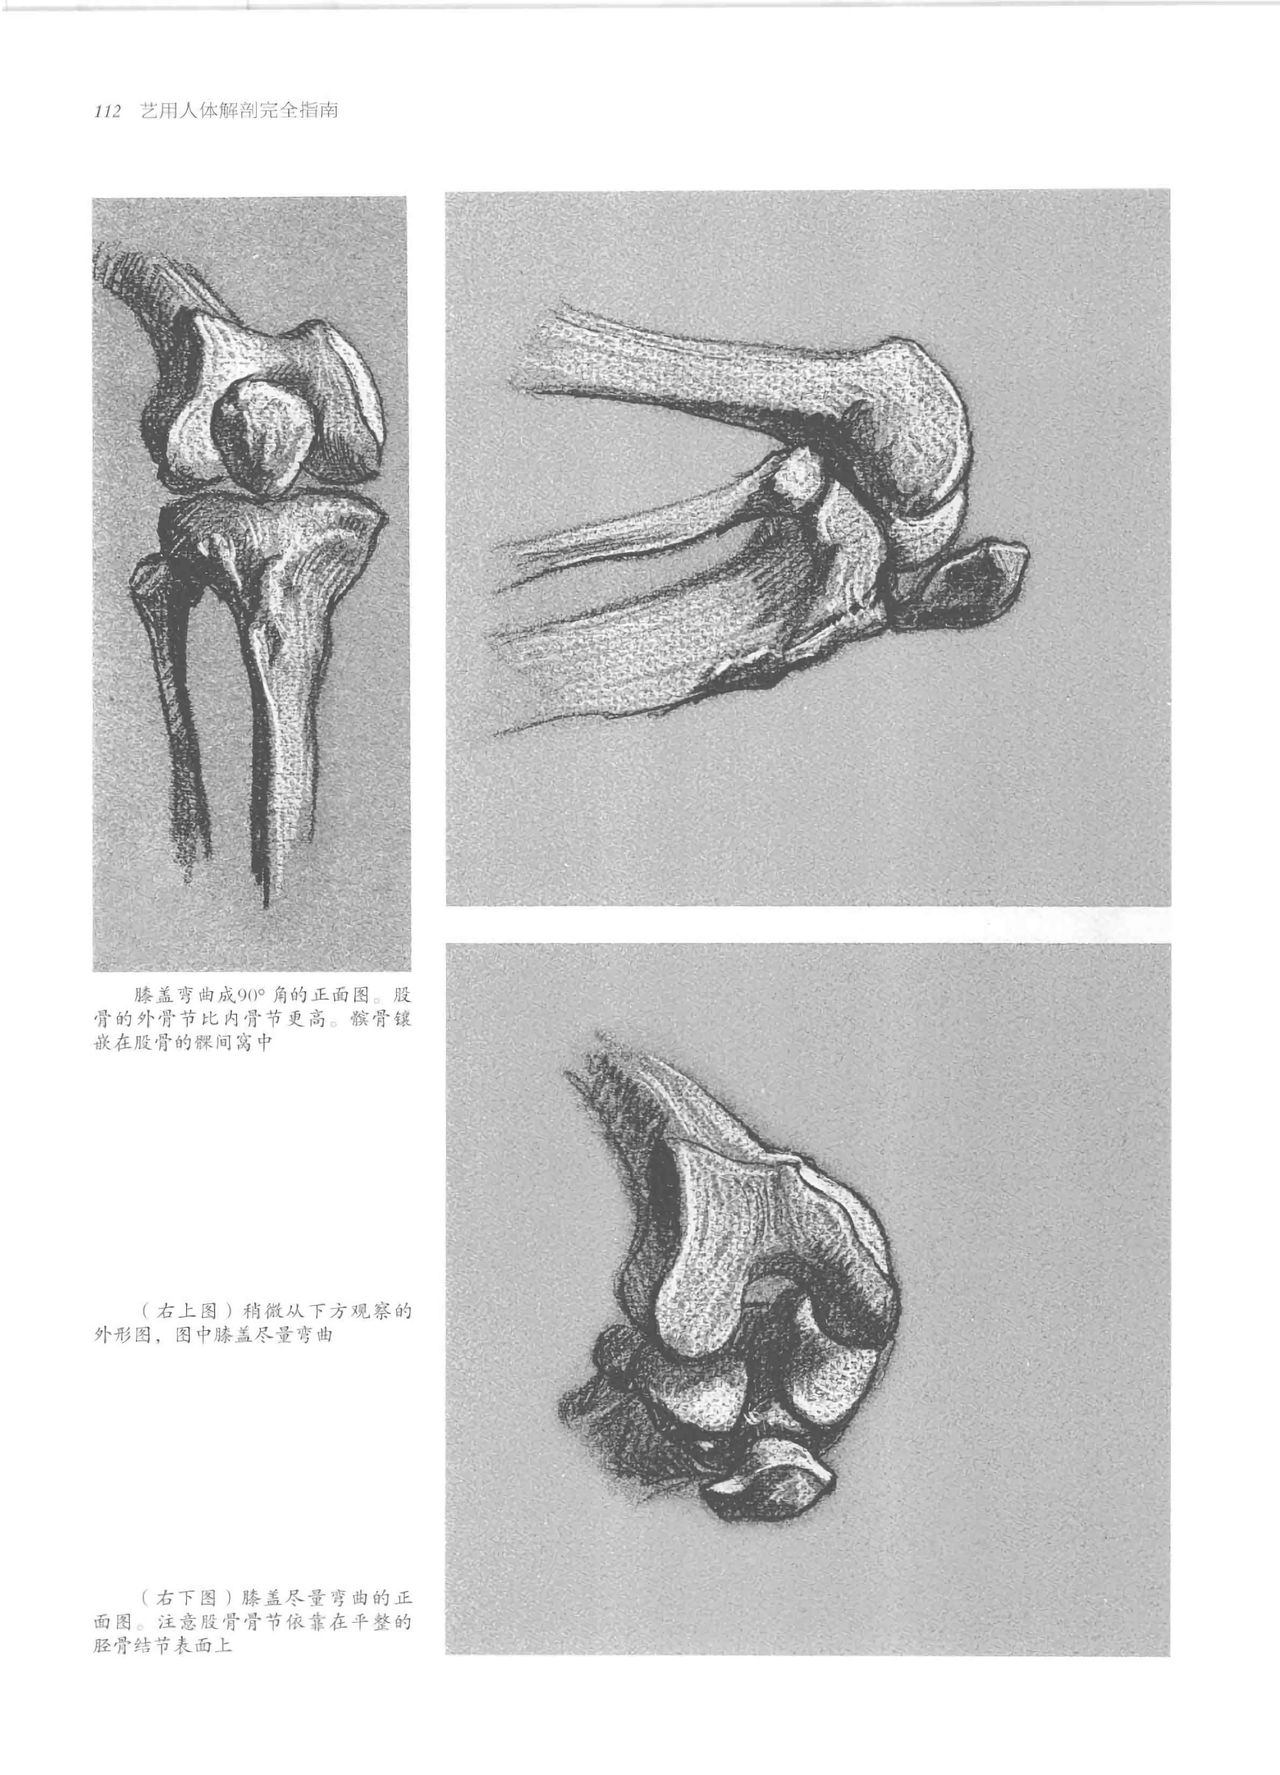 Anatomy-A Complete Guide for Artists - Joseph Sheppard [Chinese] 112